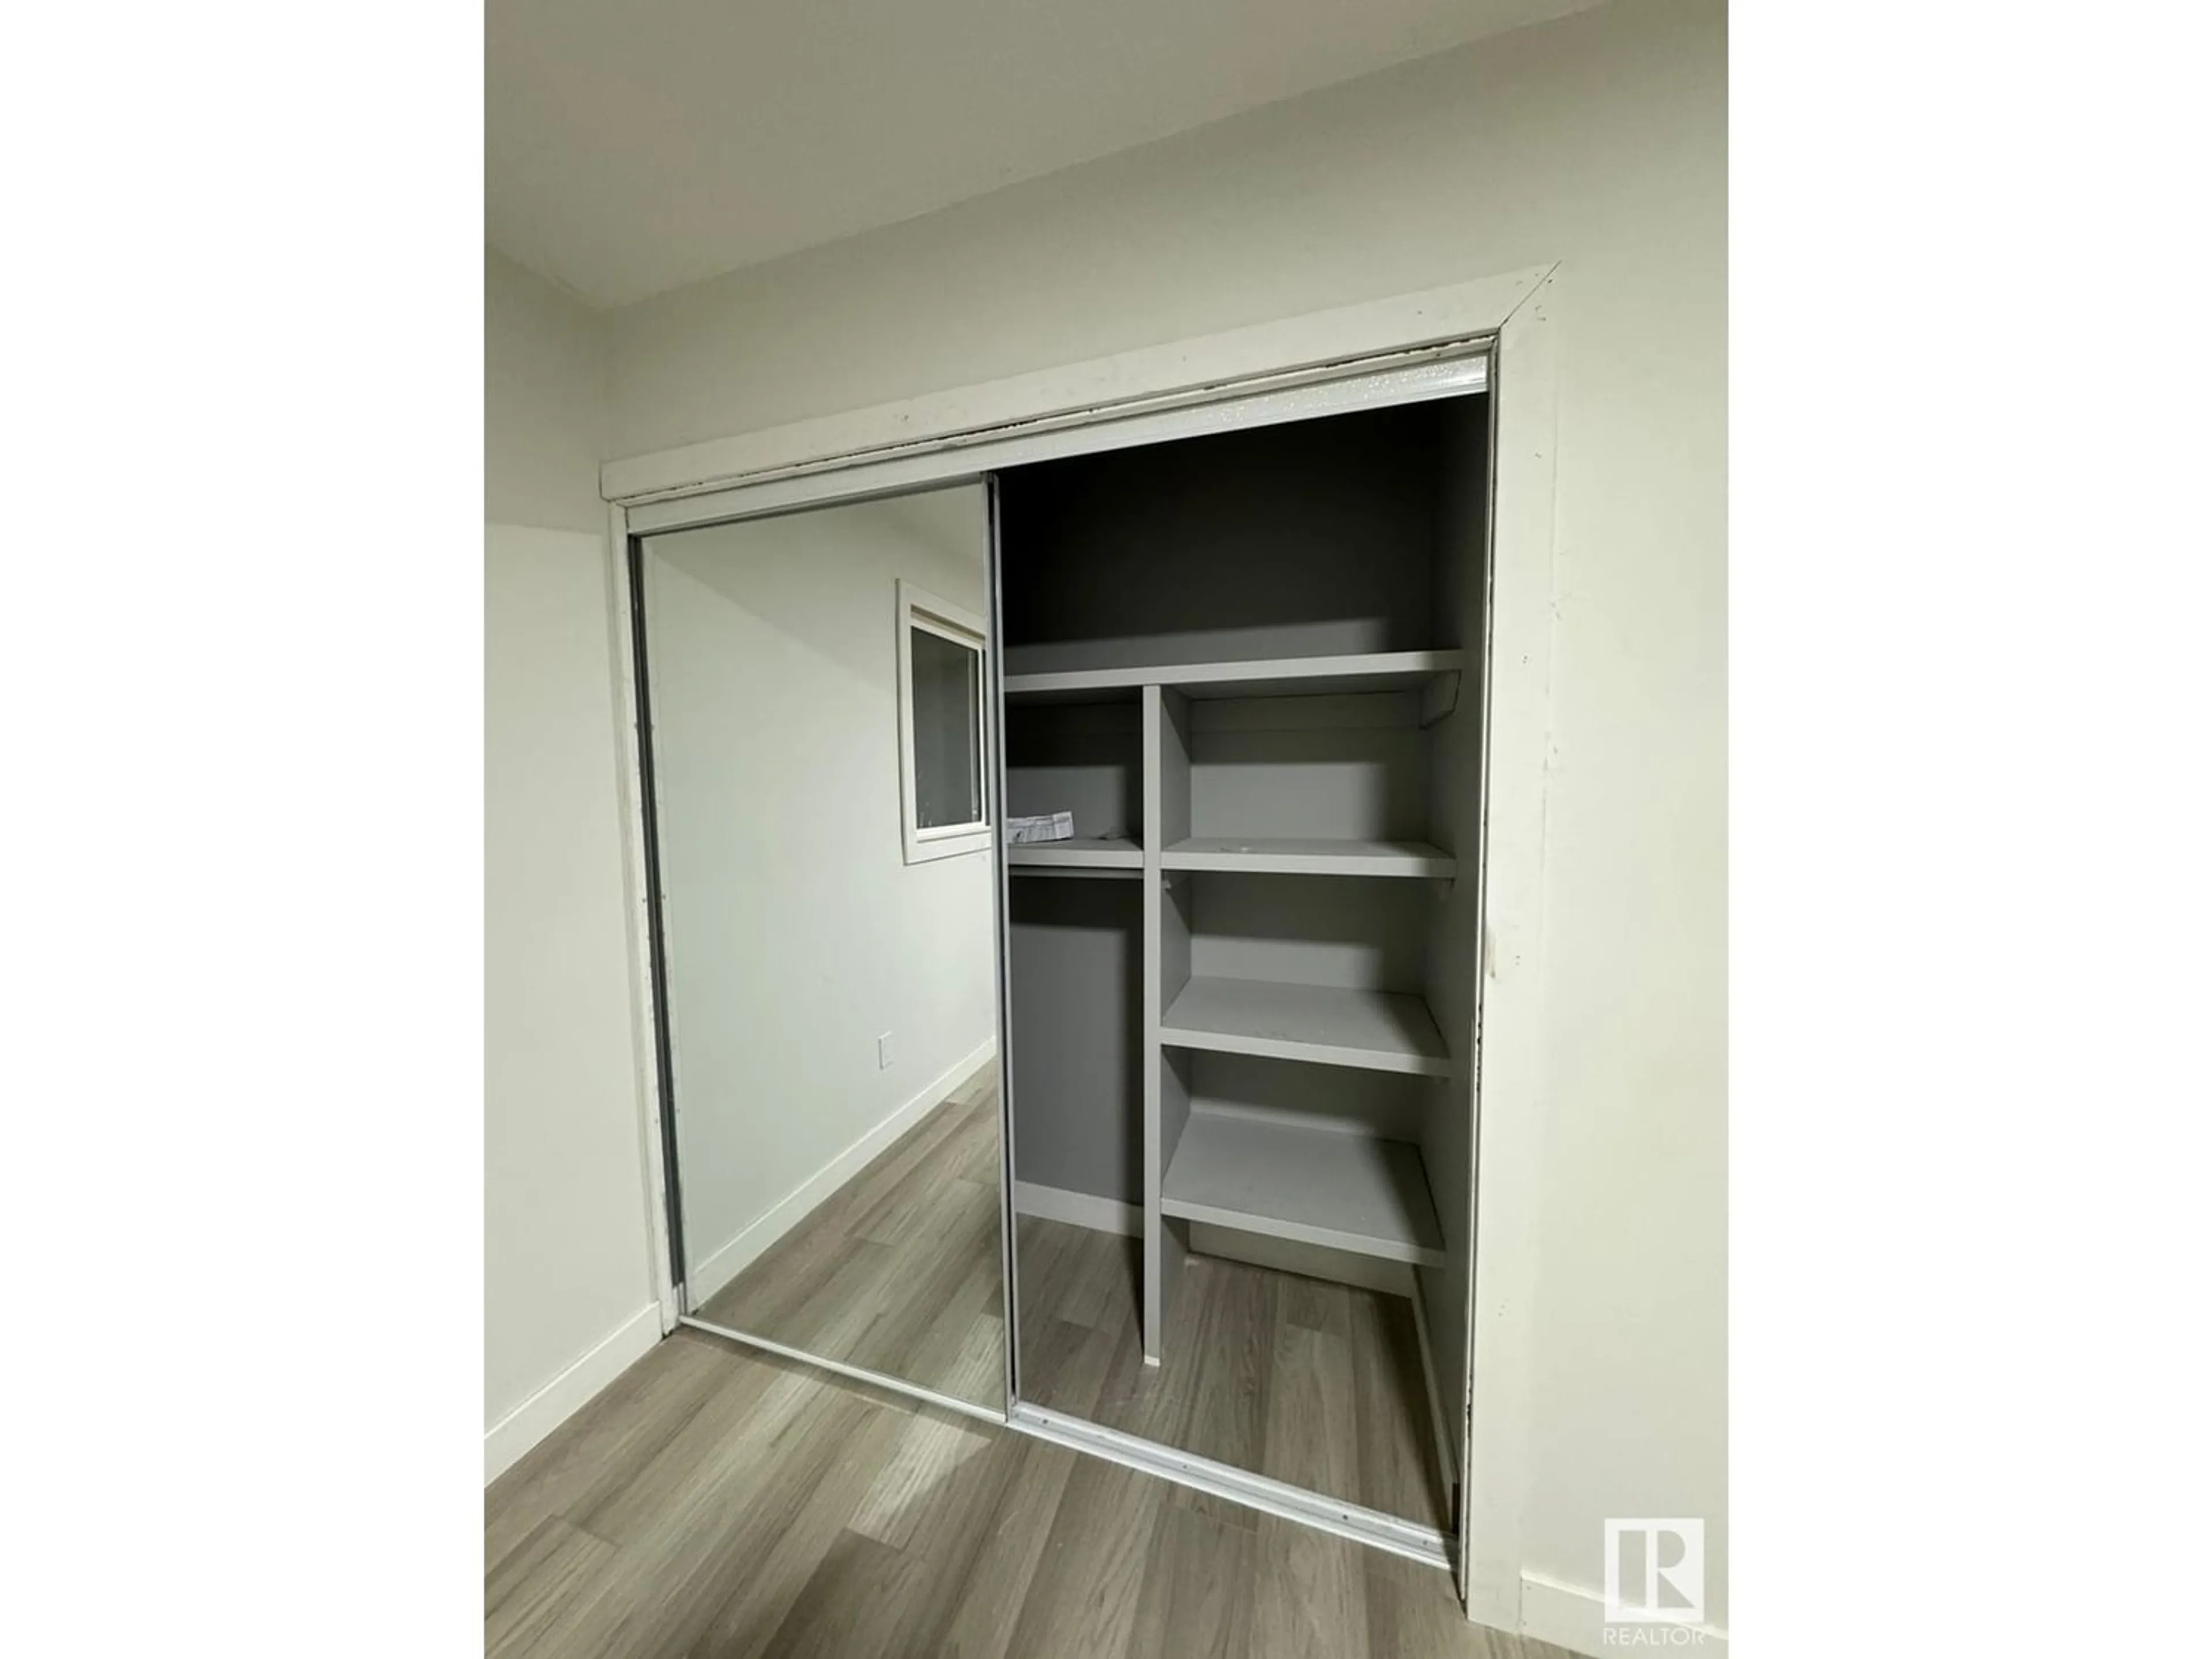 Storage room or clothes room or walk-in closet for 13823 28 ST NW, Edmonton Alberta T5Y1A6